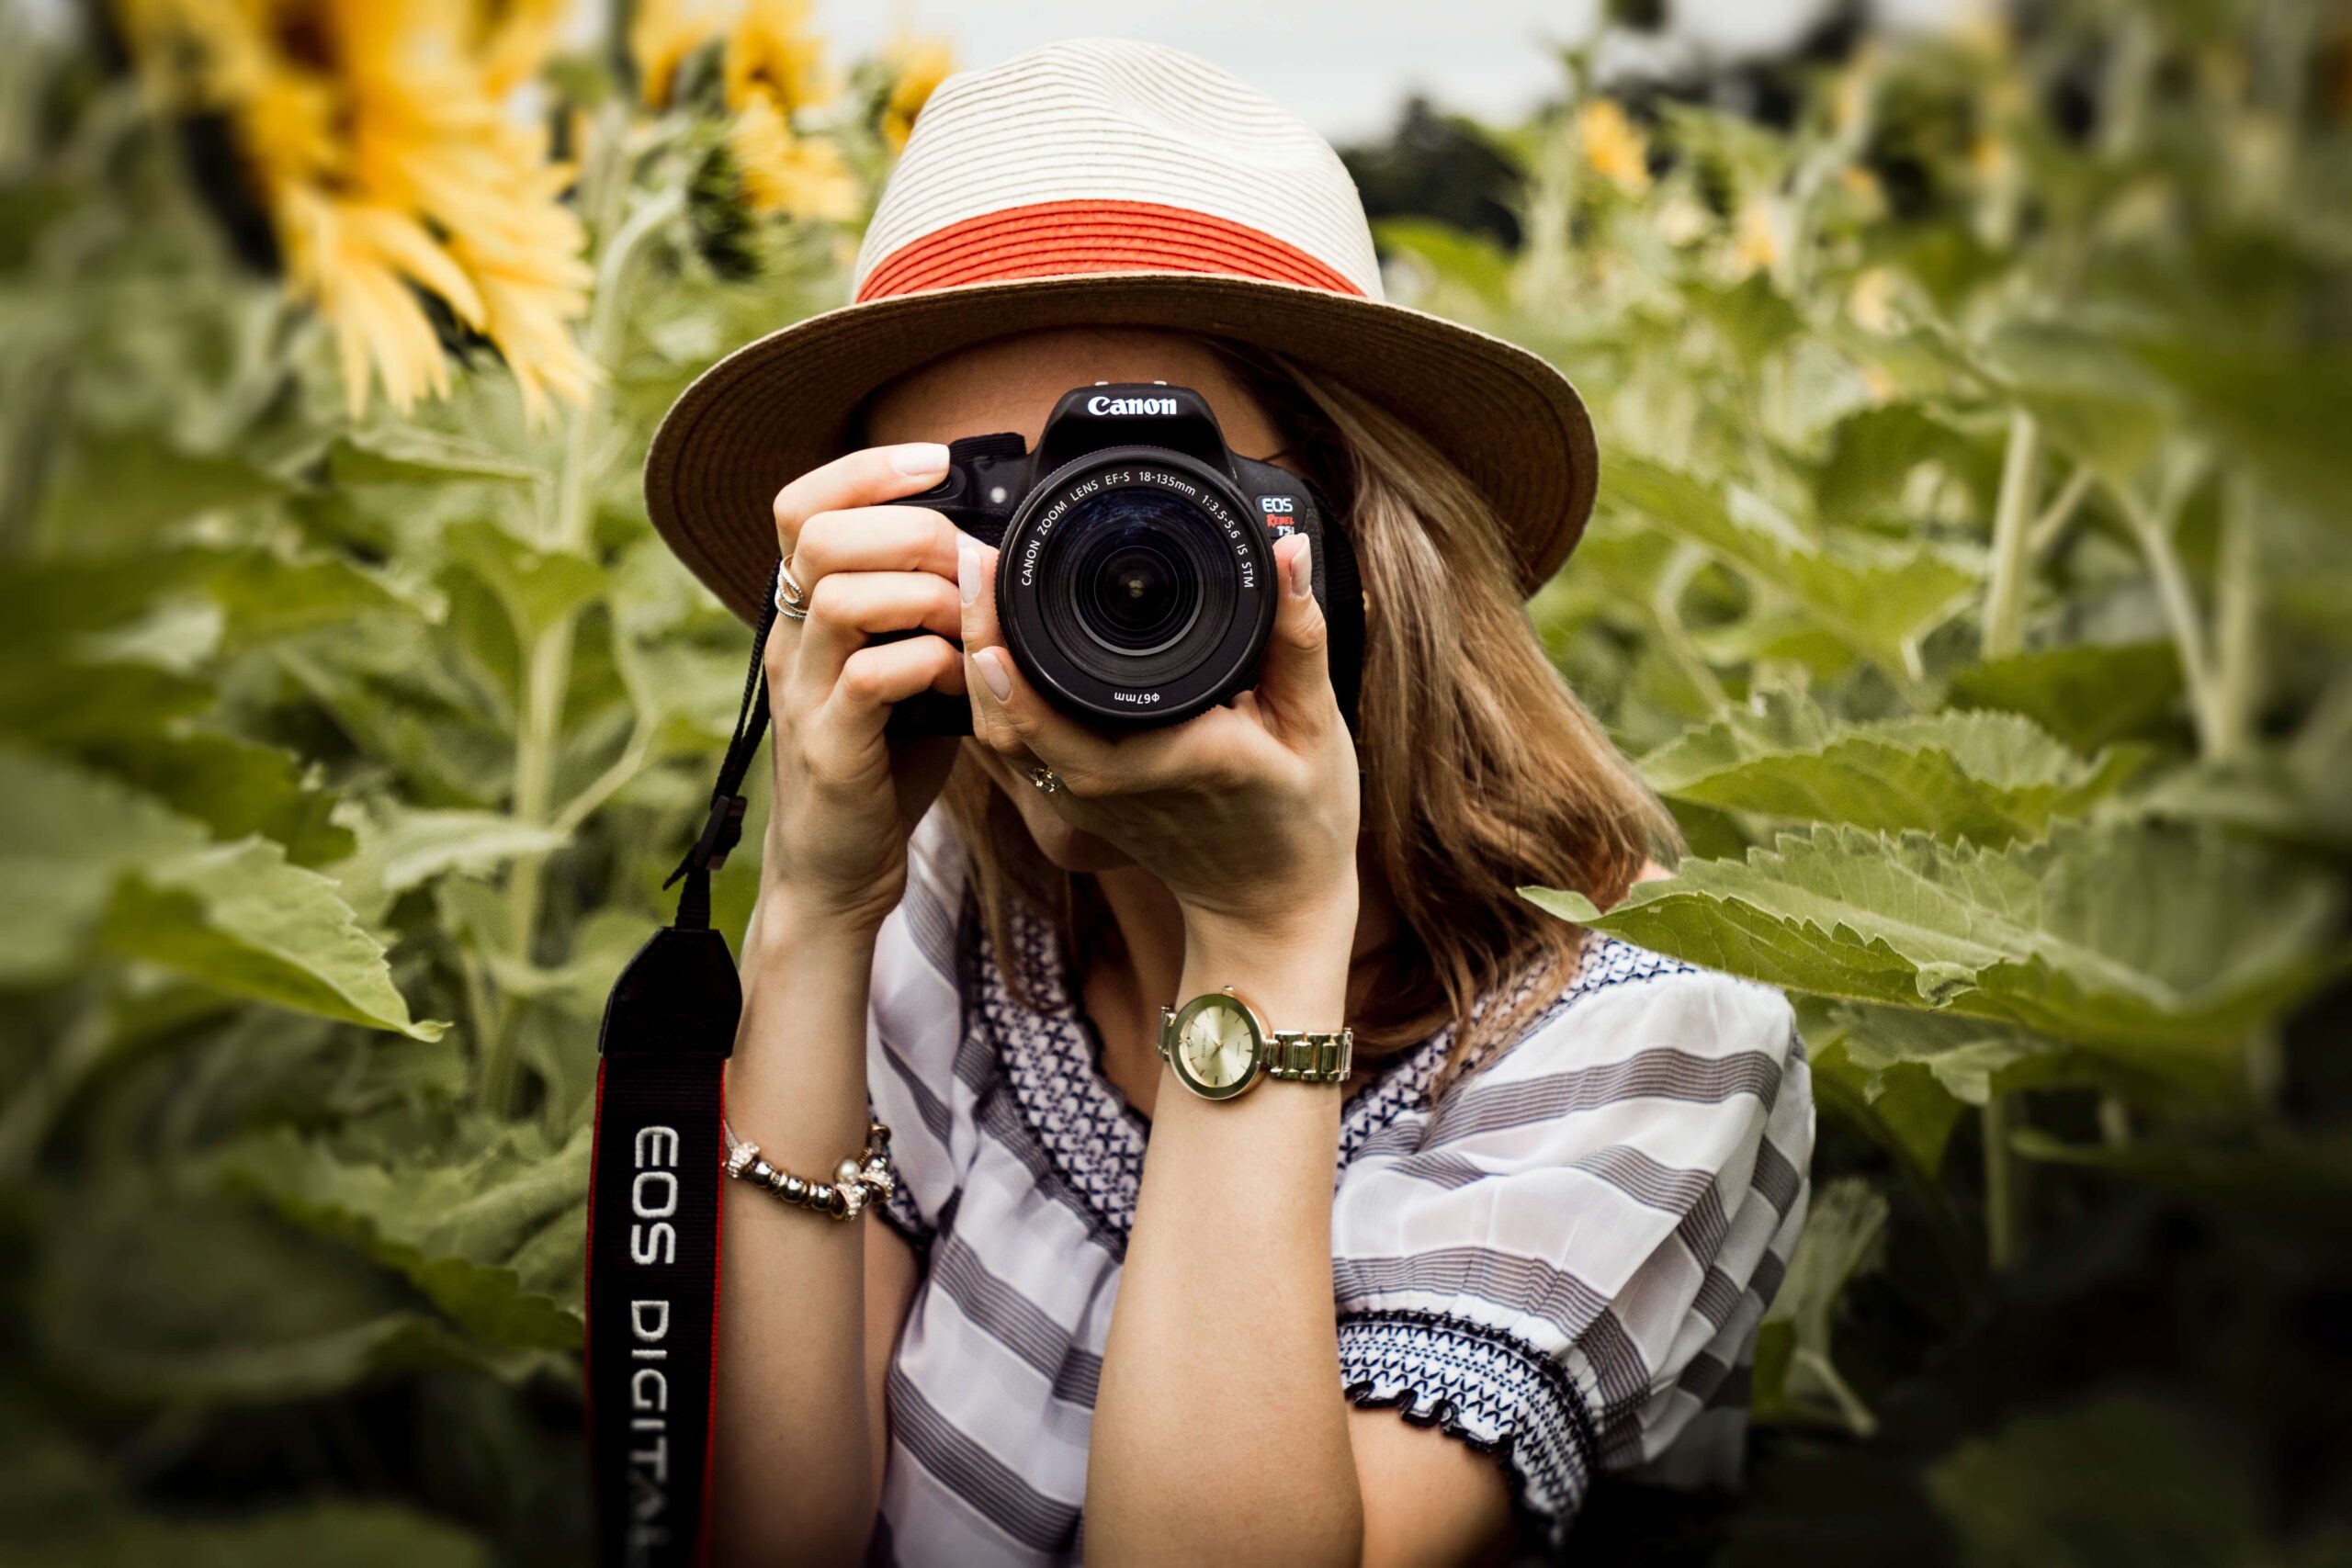 How to Find Photography Jobs – 15 Ideas to Land Your Next Gig